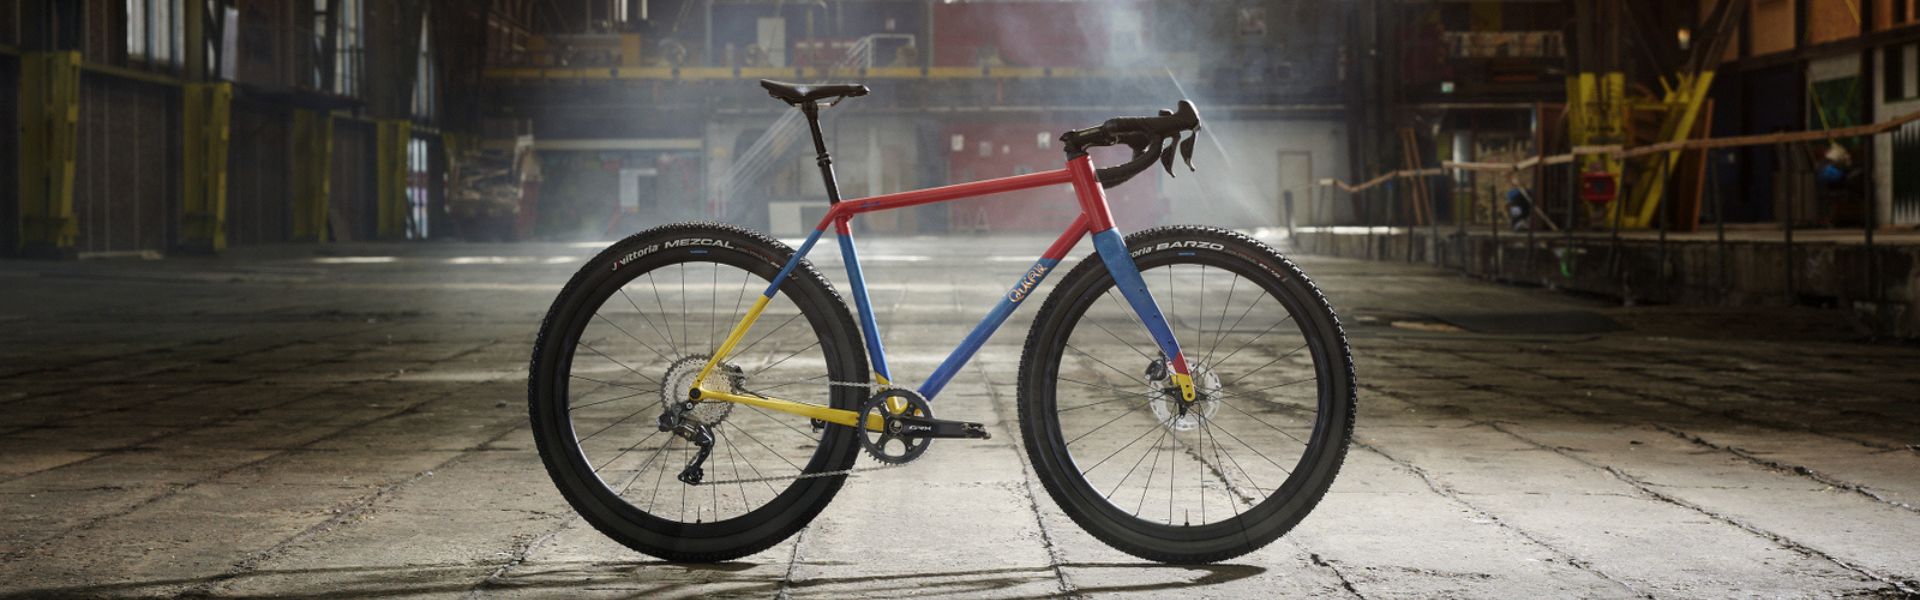 #MakeItYours: Sweet PRO Custom Builds by Feather Cycles and Quirk Cycles